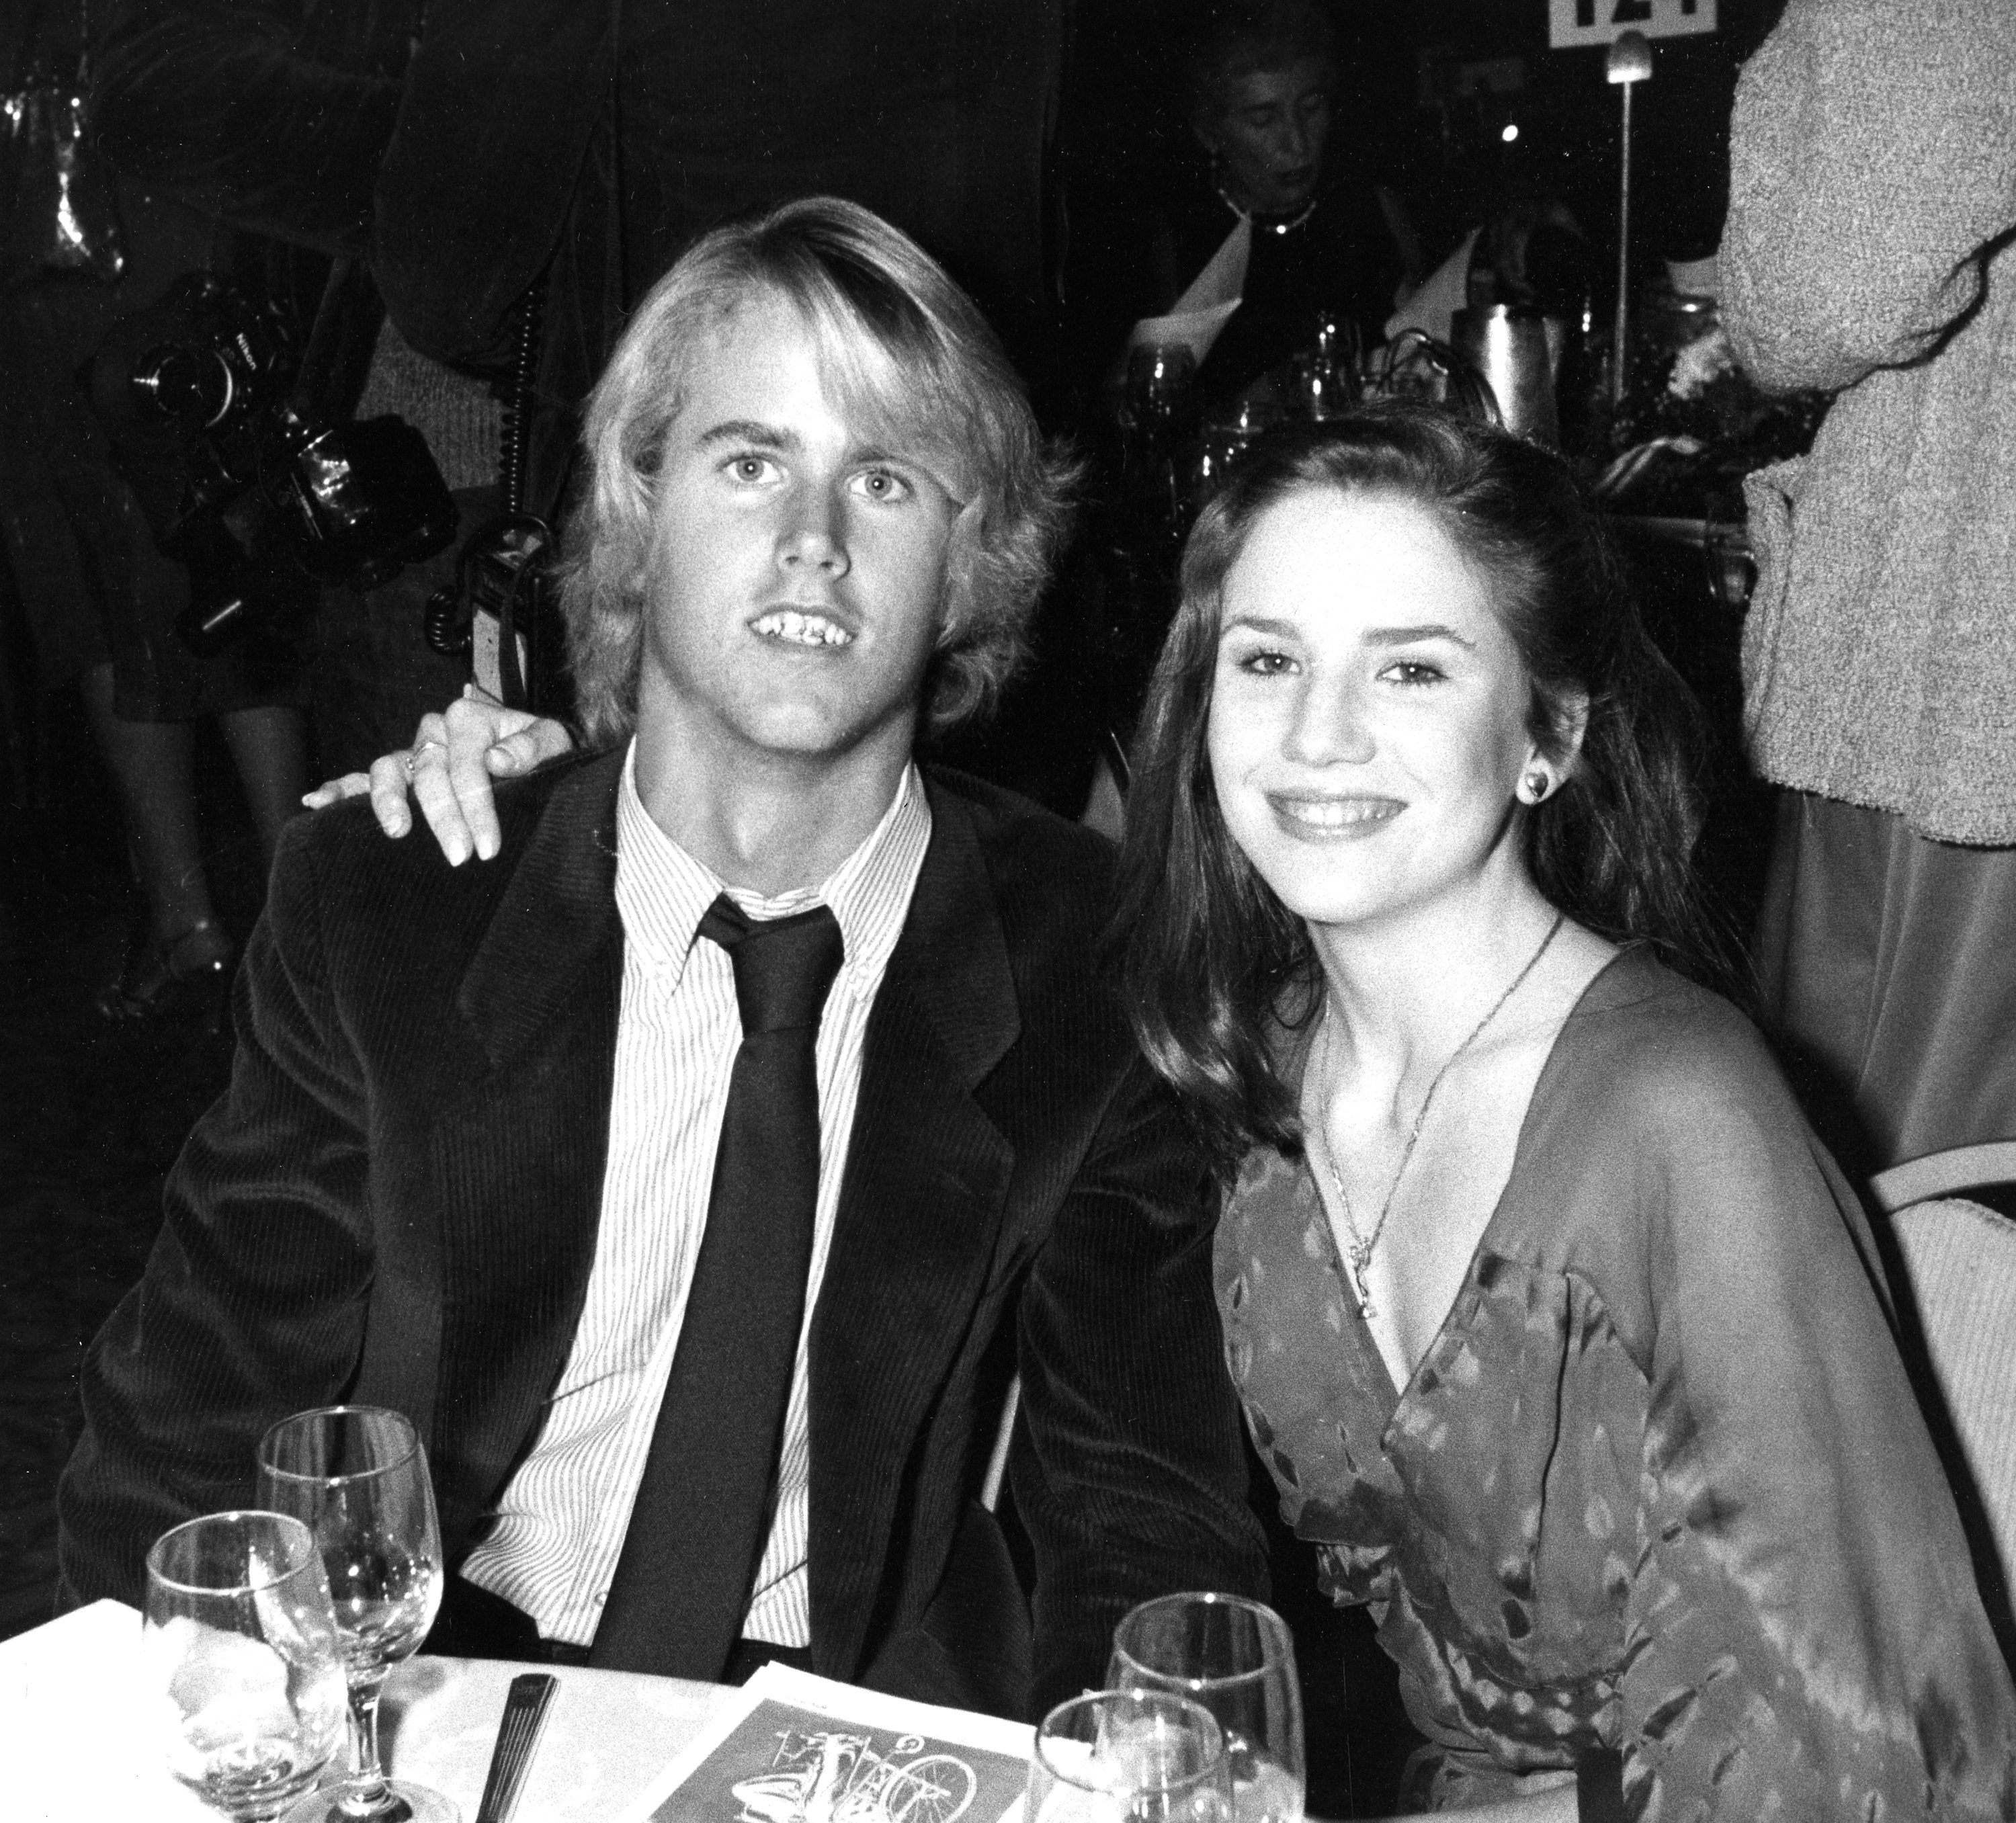 Actor Michael Landon Jr. and Melissa Gilbert attending the Third Annual Media Awards Gala "Changing Attitudes" at the Beverly Hilton Hotel on January 22, 1981 in Beverly Hills, California. / Source: Getty Images